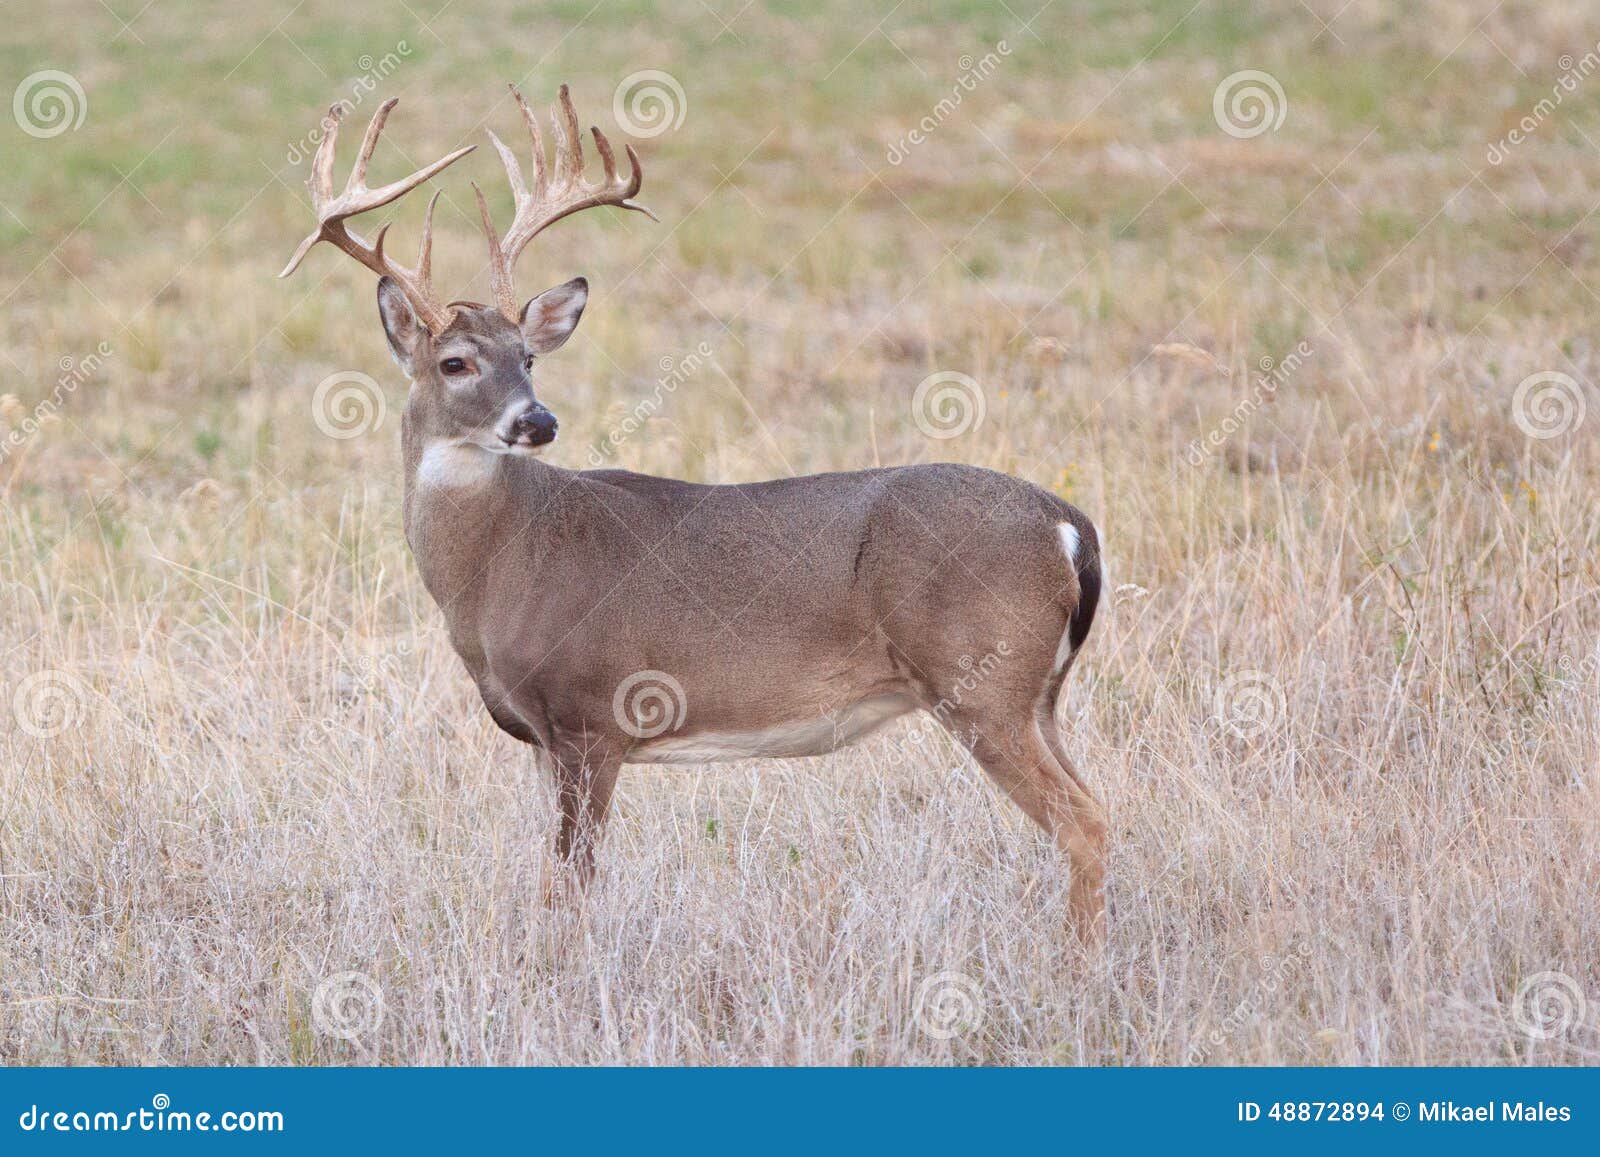 whitetail buck looking behind